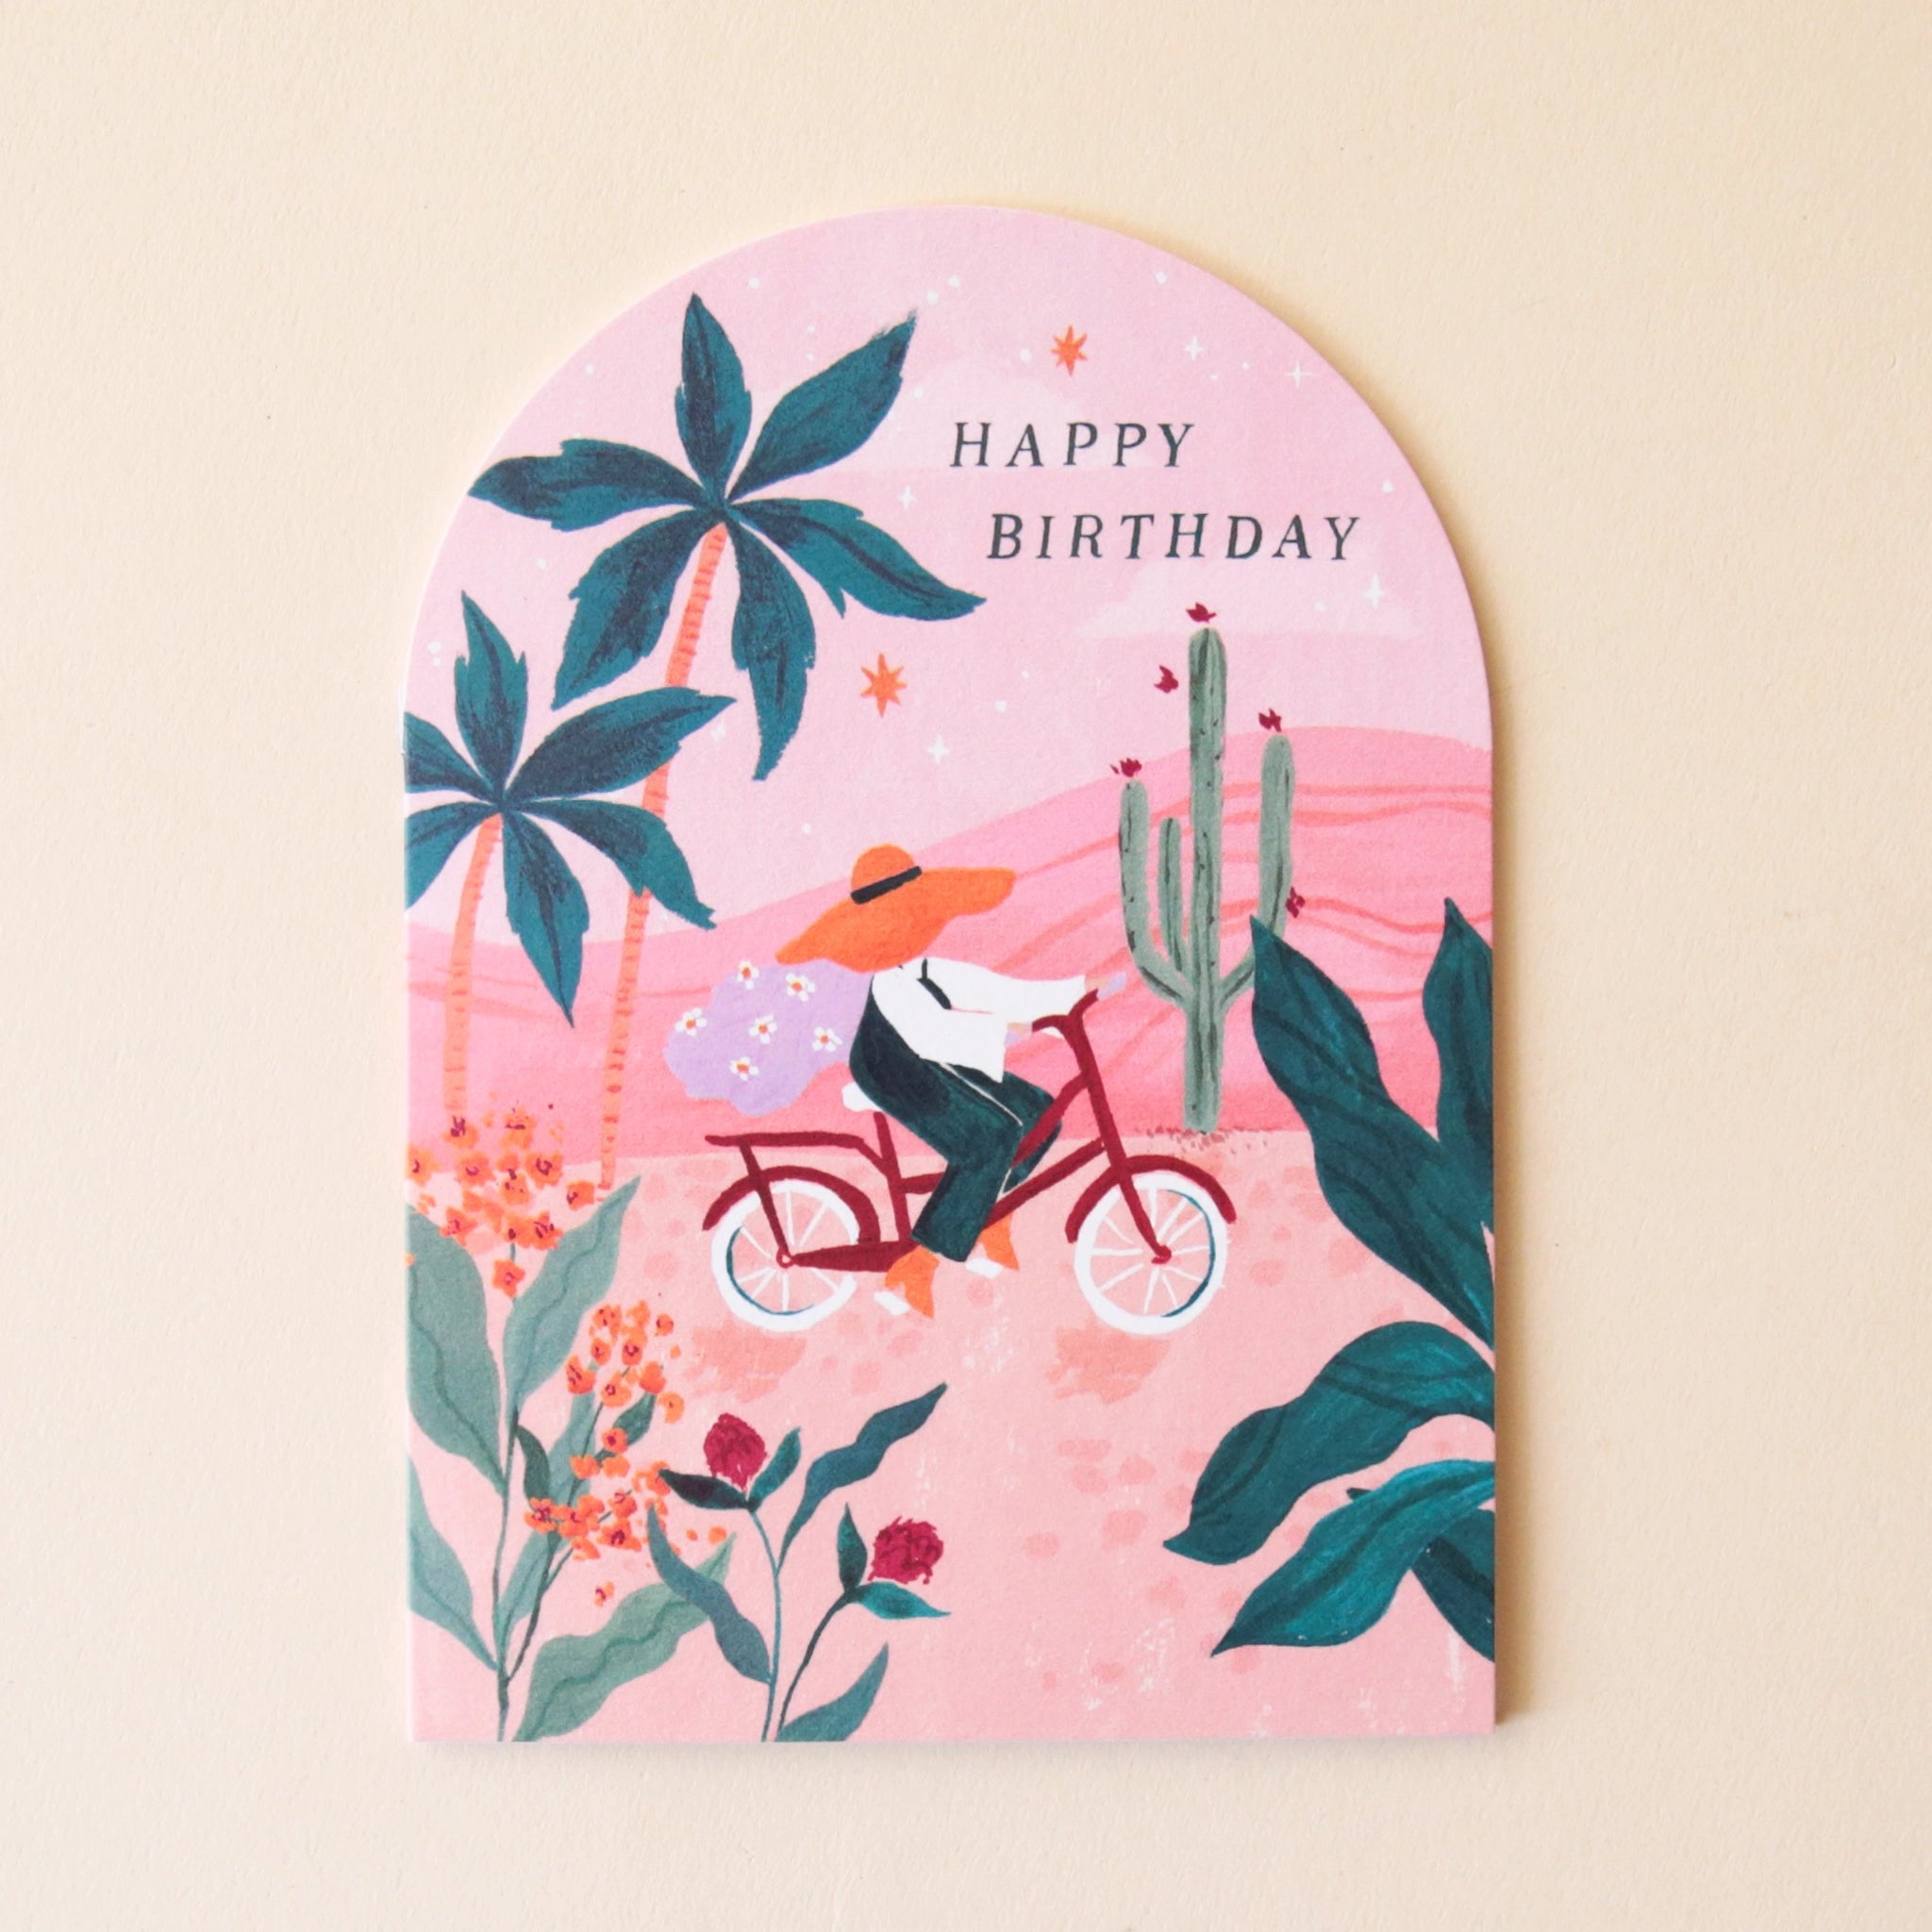 A pink arched greeting card with beautiful illustrations of palm trees, cacti and florals along with someone riding their red bicycle through the foliage along with text that reads, &quot;Happy Birthday&quot;.